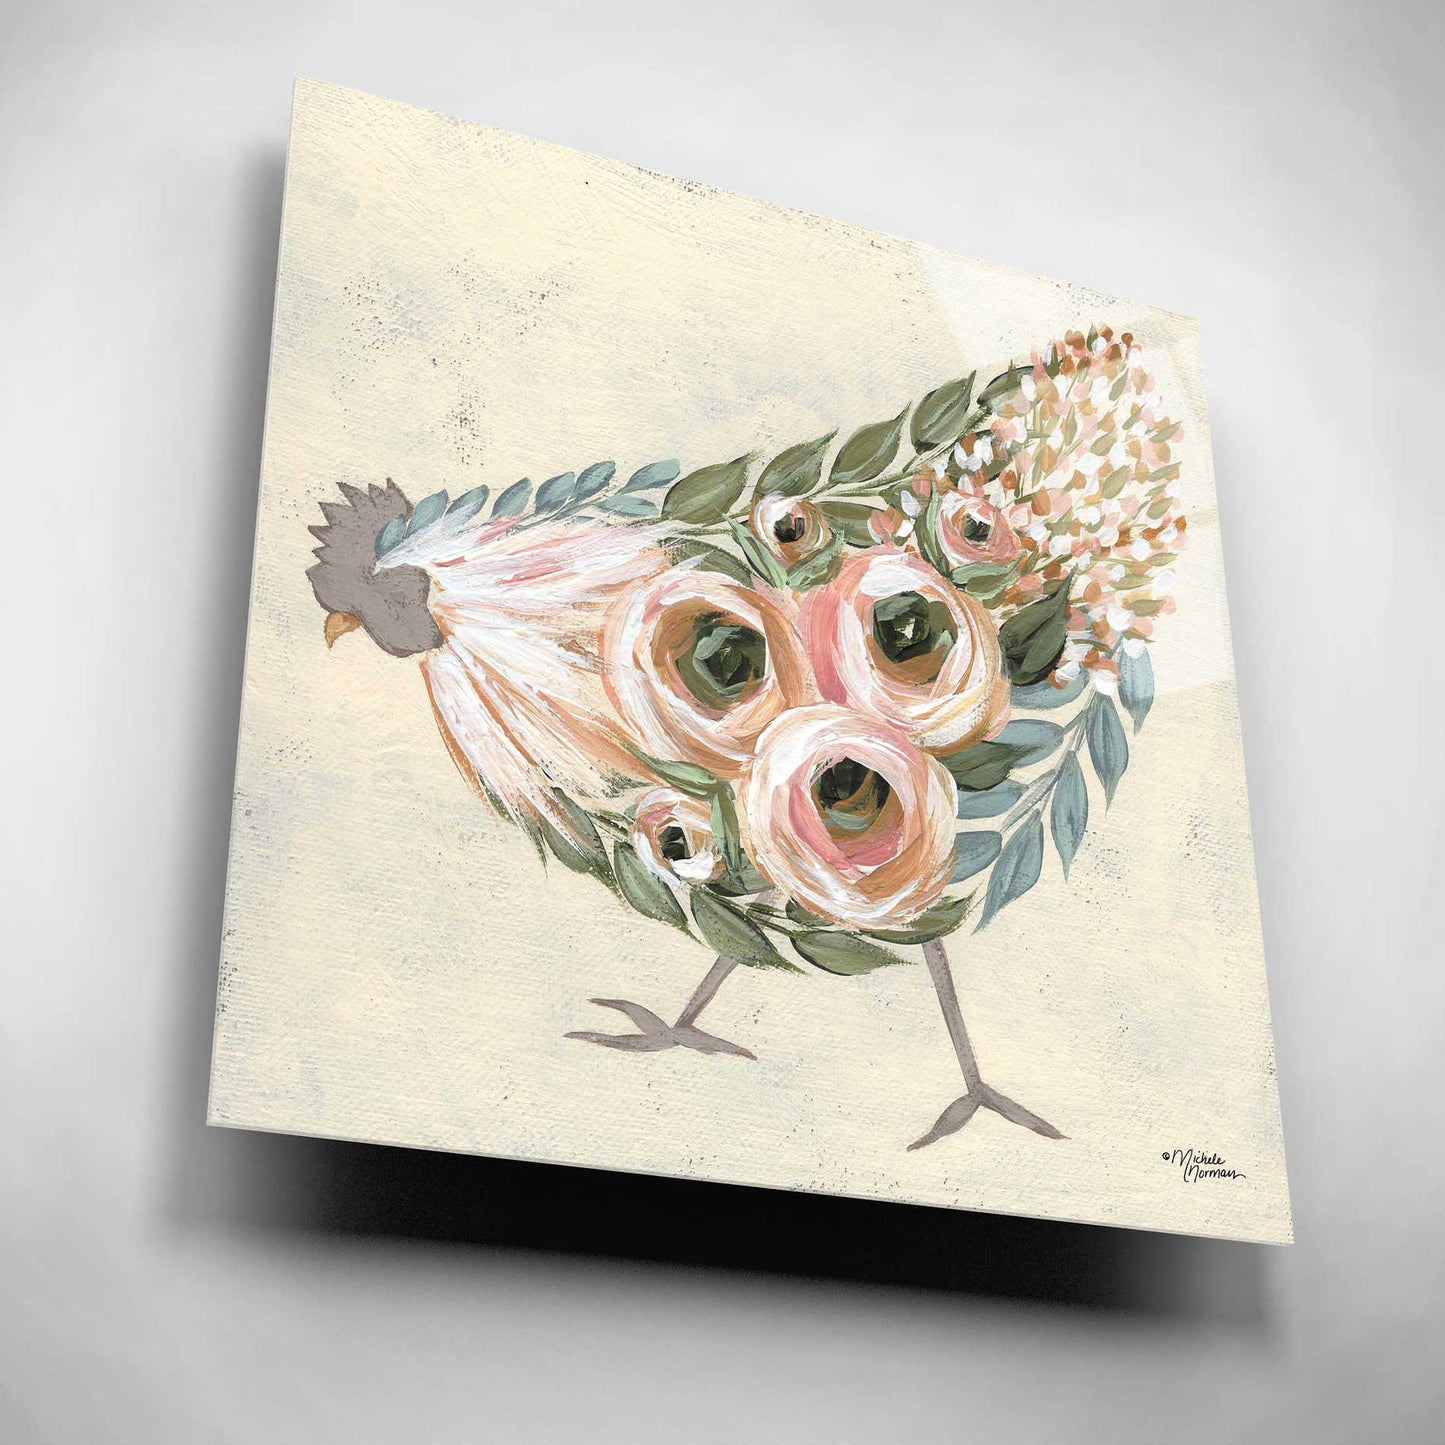 Epic Art 'Astrid the Hen' by Michele Norman, Acrylic Glass Wall Art,12x12